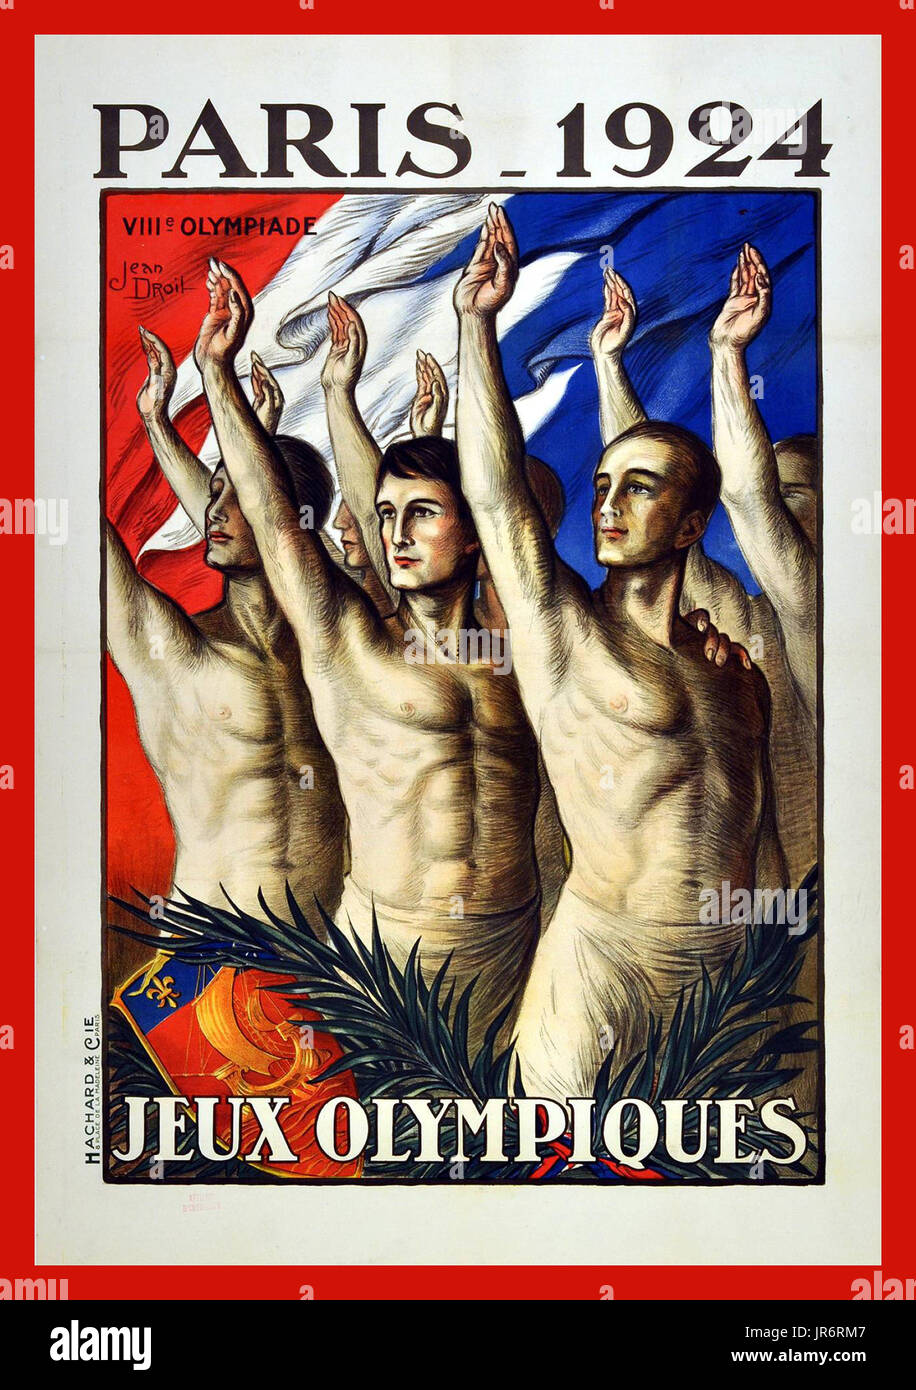 PARIS OLYMPIADE JEUX OLYMPIQUES 1924 Vintage historic Olympic Games poster for 1924 Paris FRANCE Stock Photo